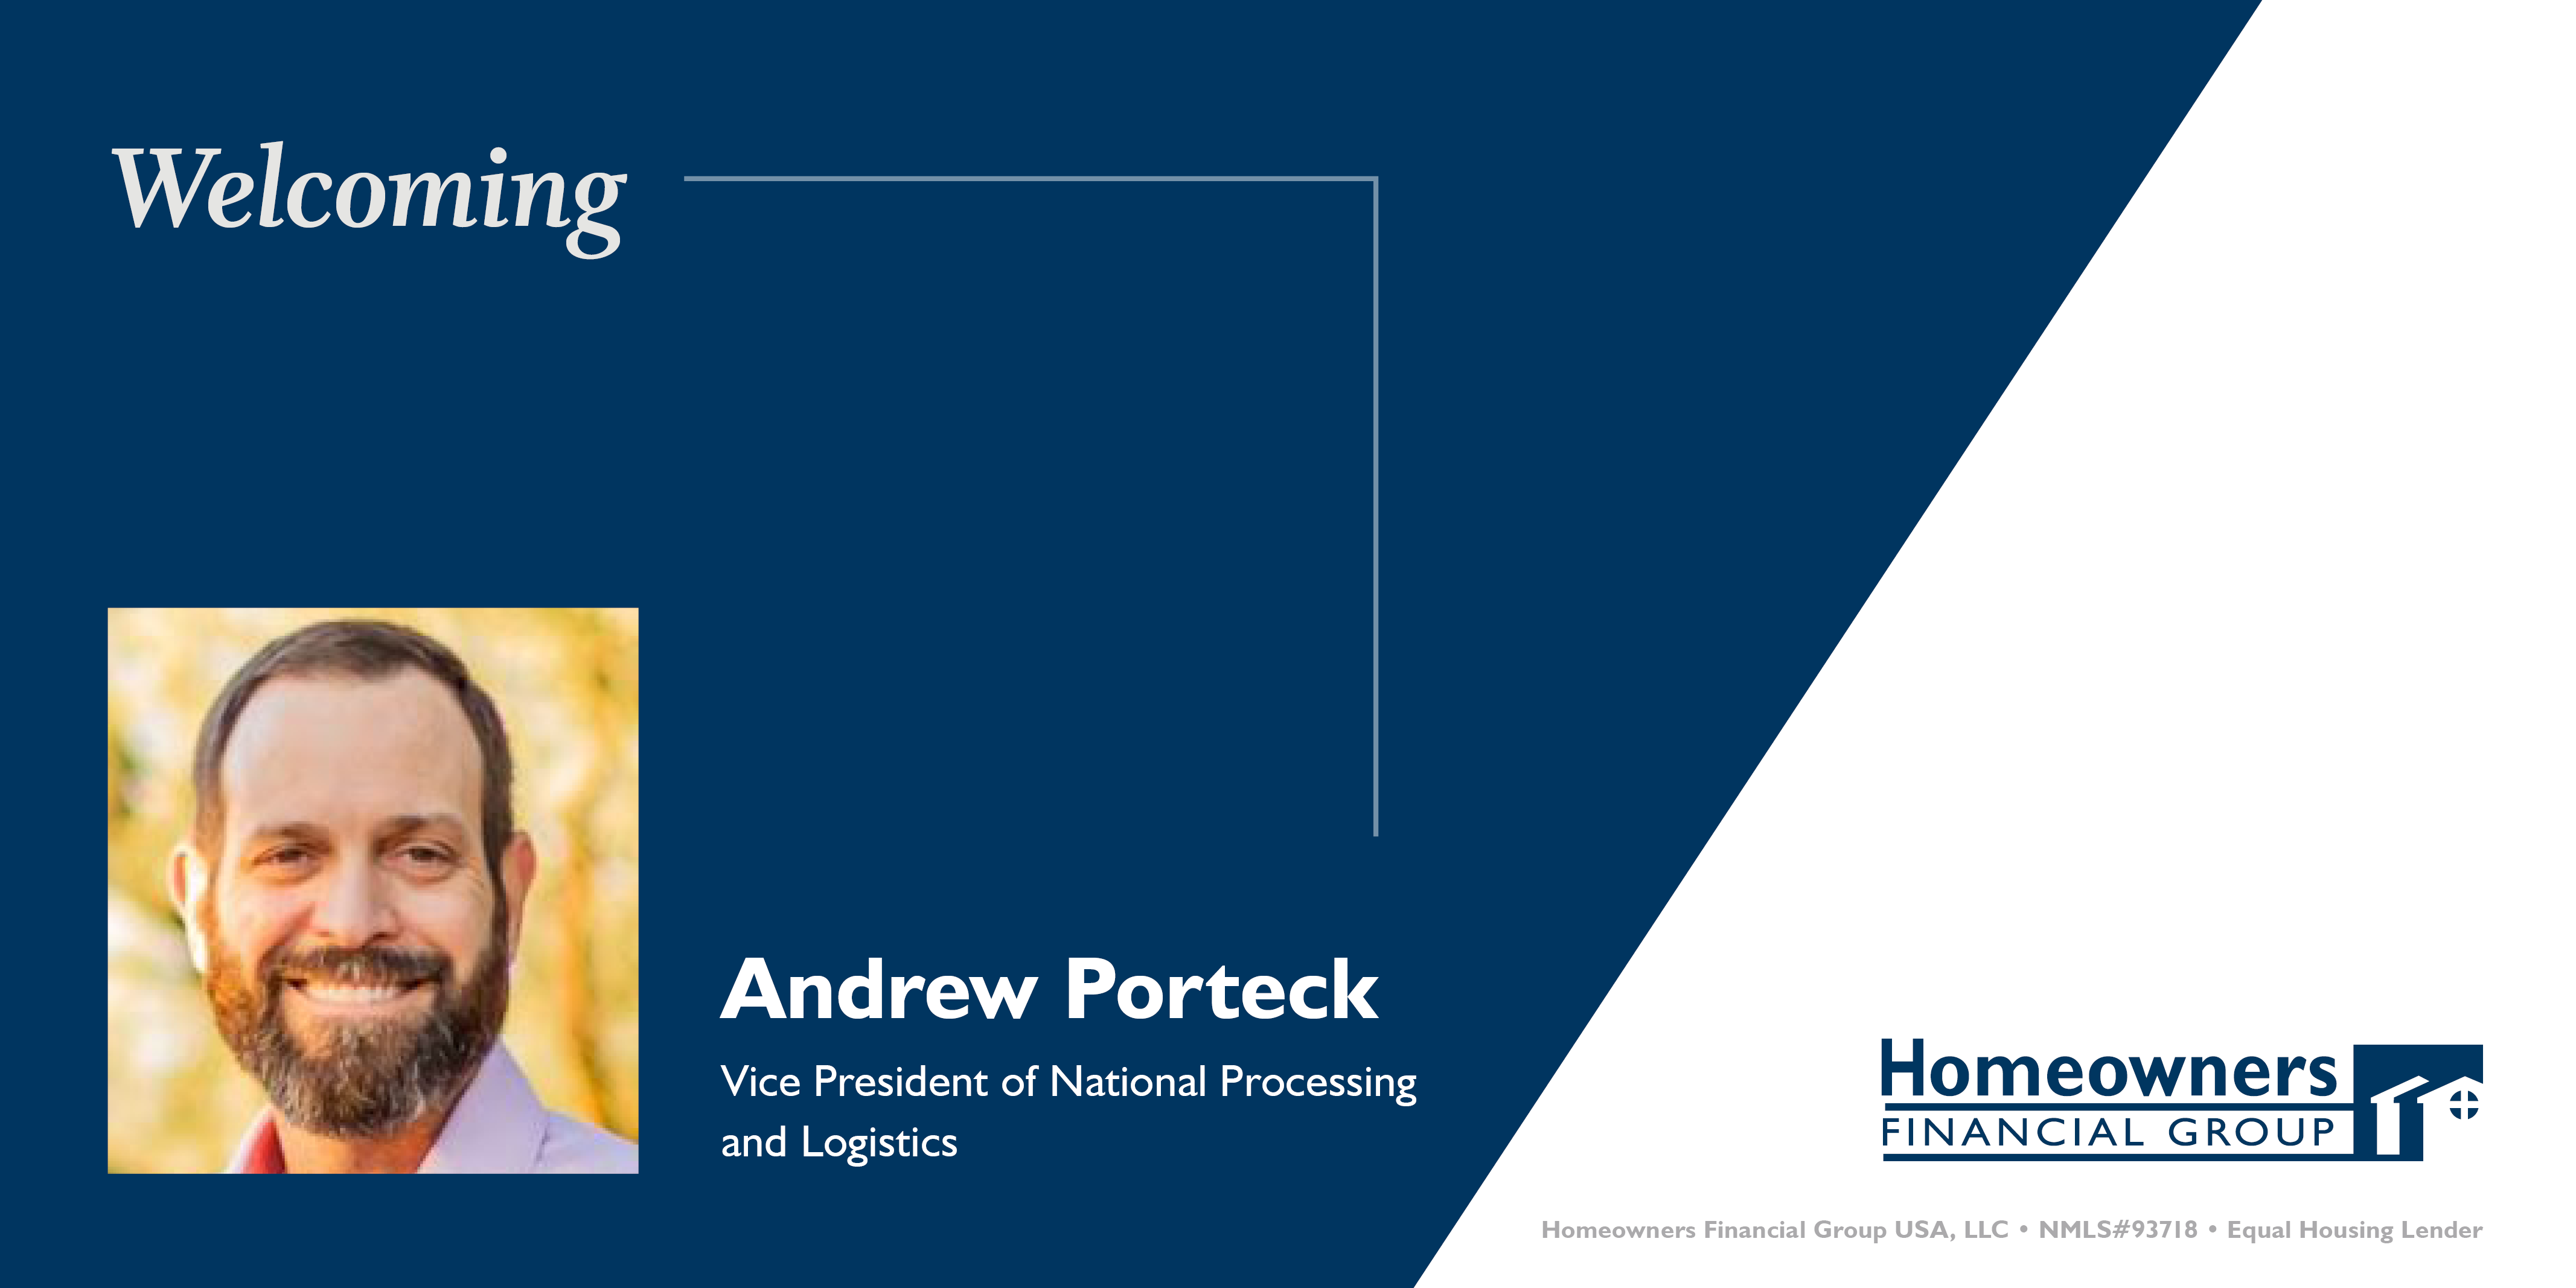 HFG Welcomes Andrew Porteck as Vice President of National Processing and Logistics